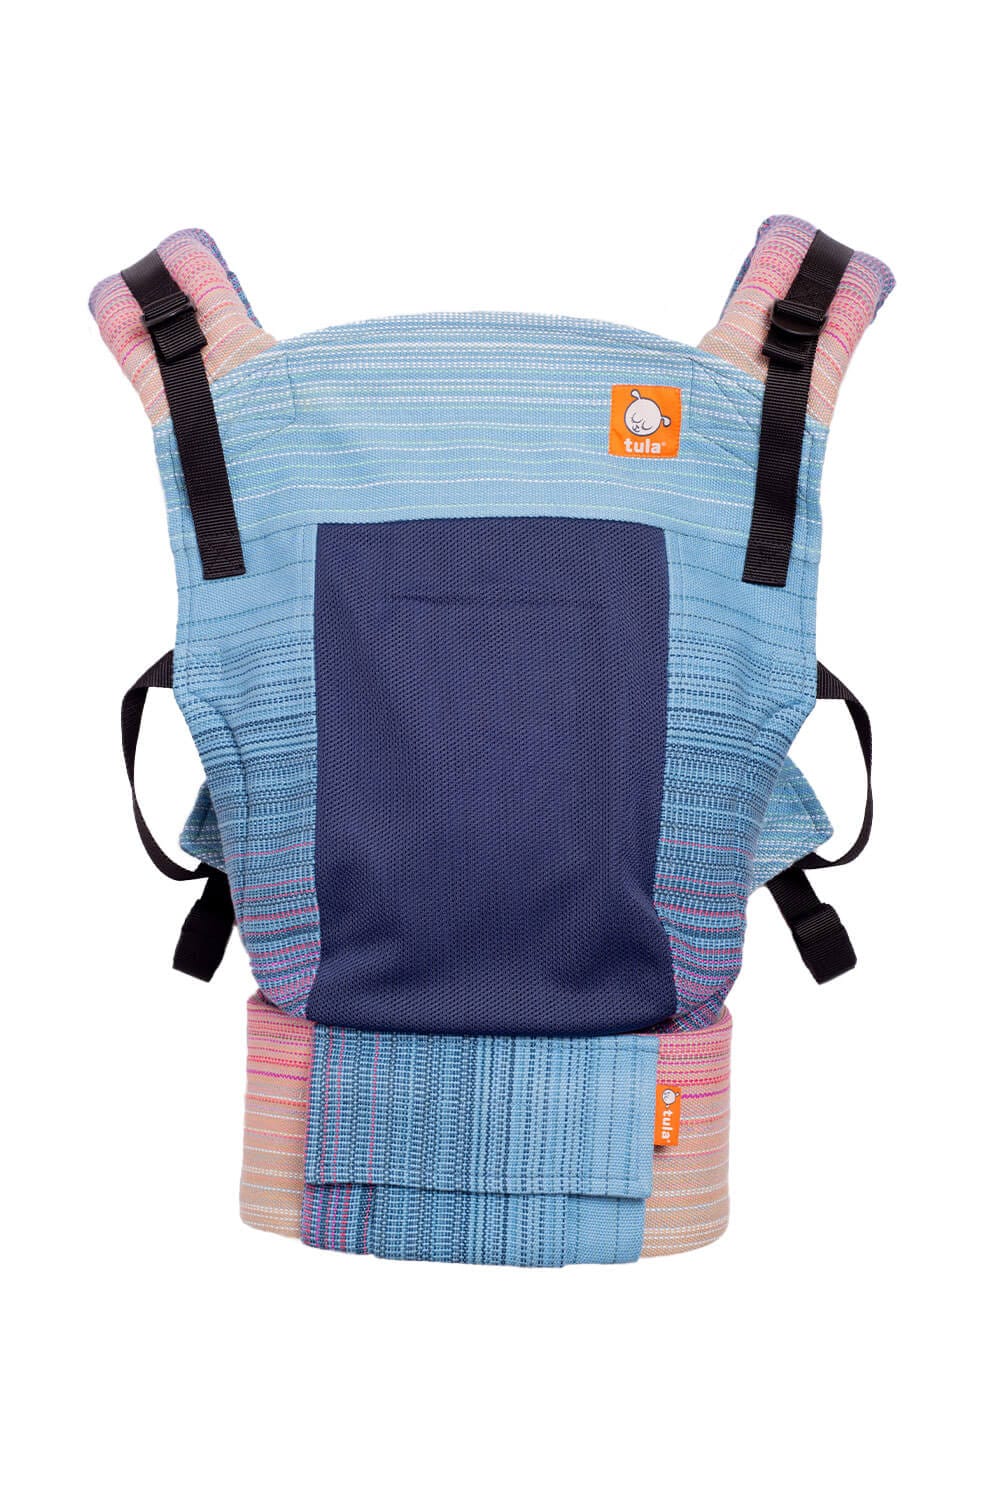 Coast Capeside - Signature Handwoven Free-to-Grow Mesh Baby Carrier